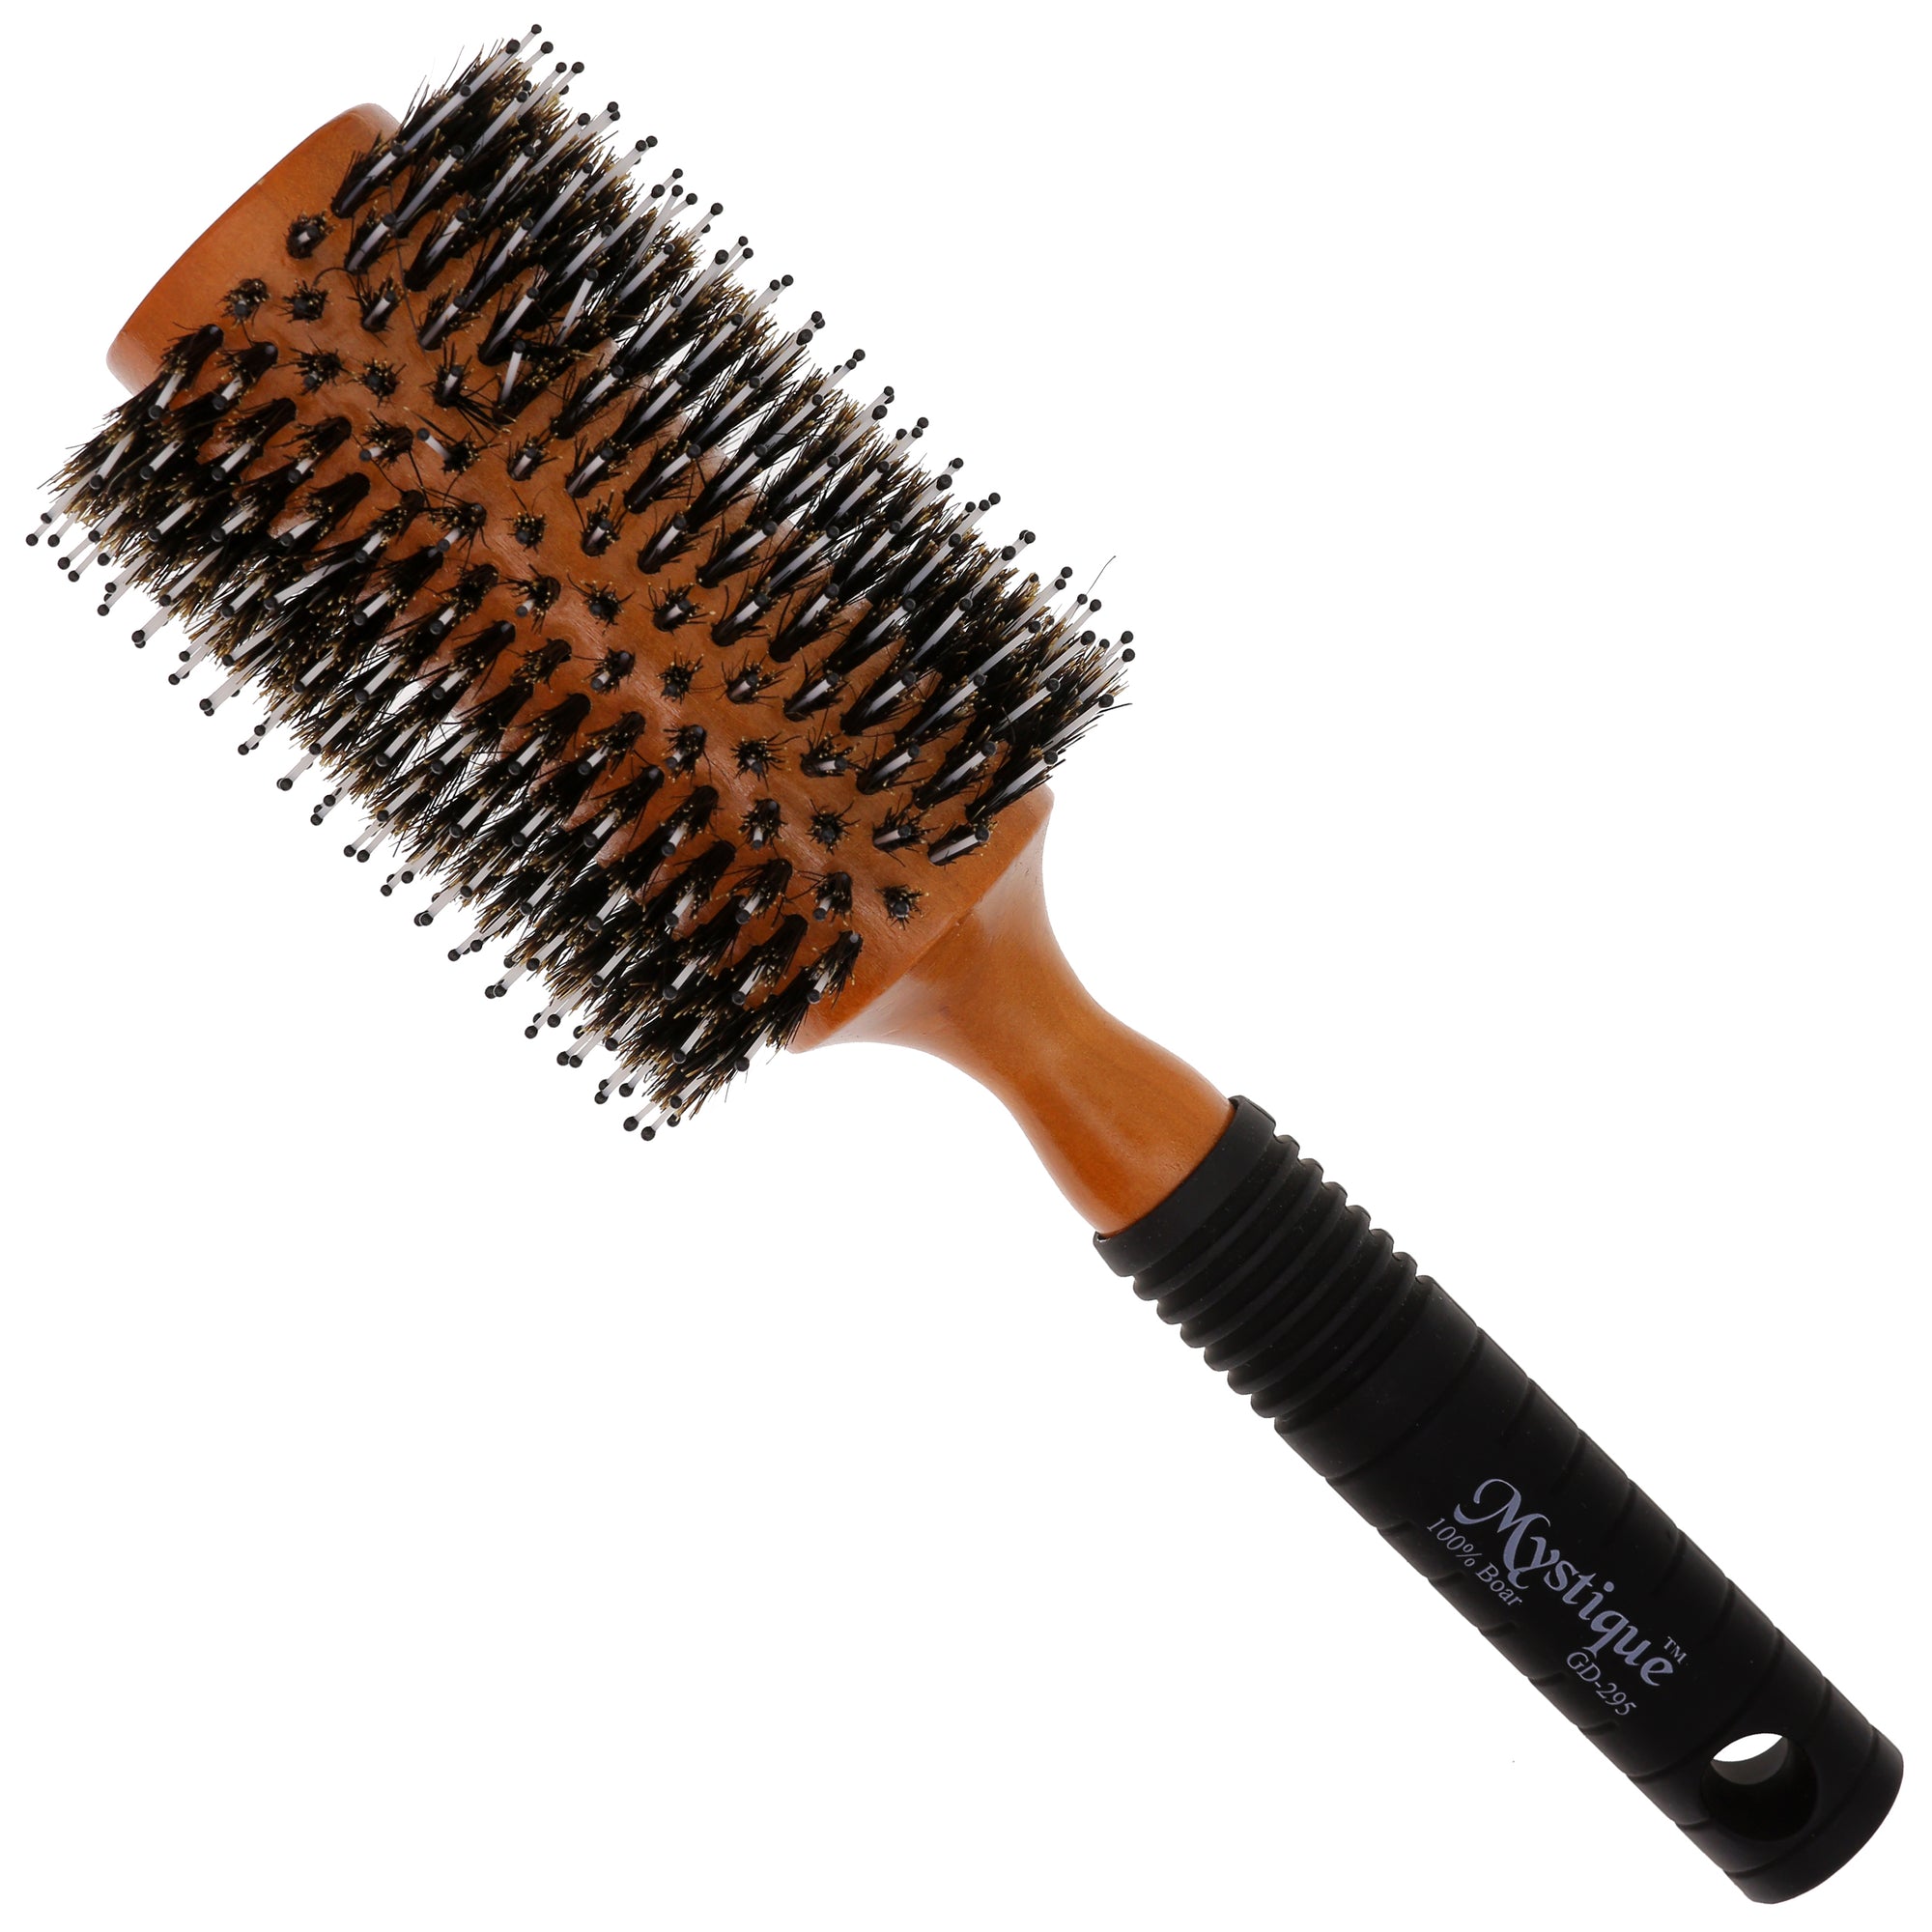 Medium Porcupine Style Round Hair Brush with Rubber Handle